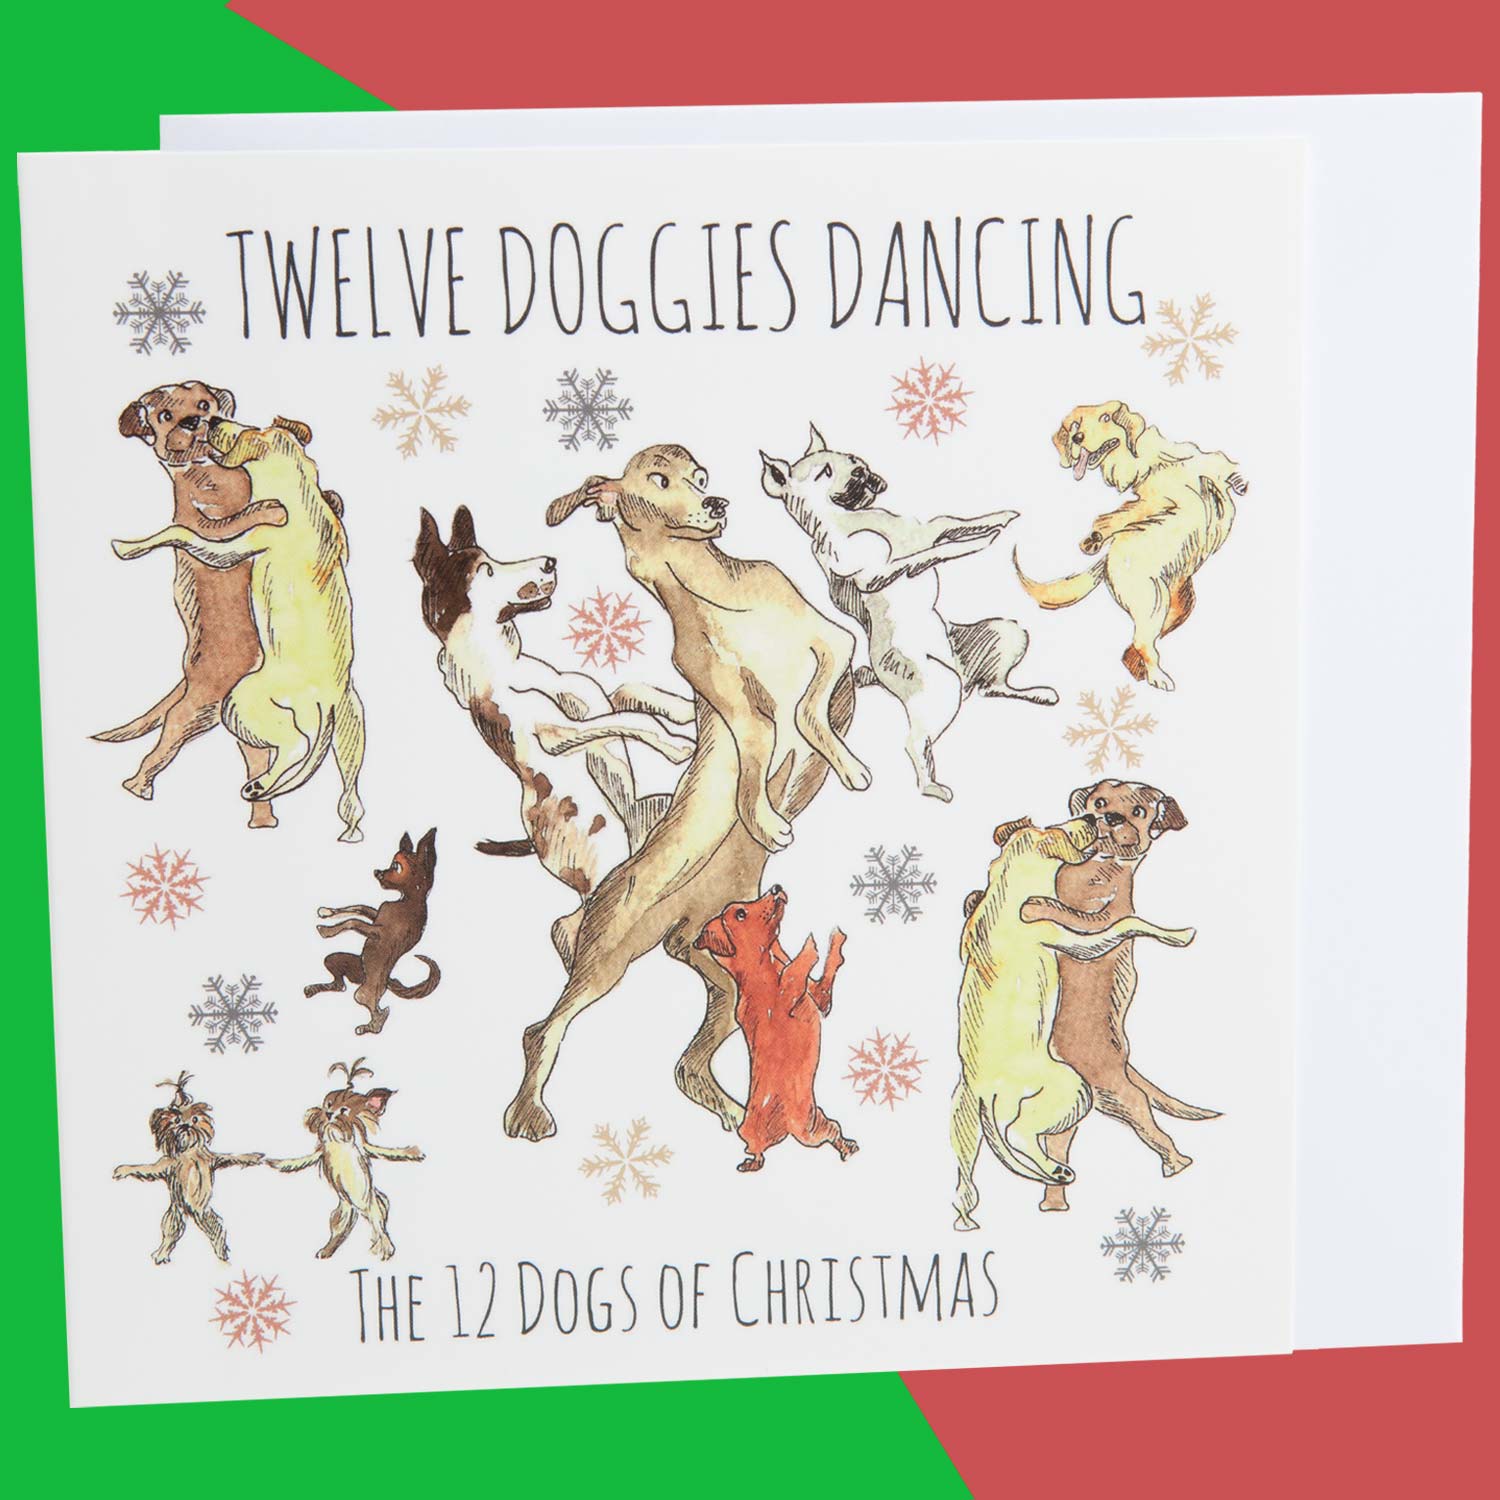 Dog Krazy Gifts - Twelve Doggies Dancing - Part of the 12 Dogs of Christmas card collection available from DogKrazyGifts.co.uk